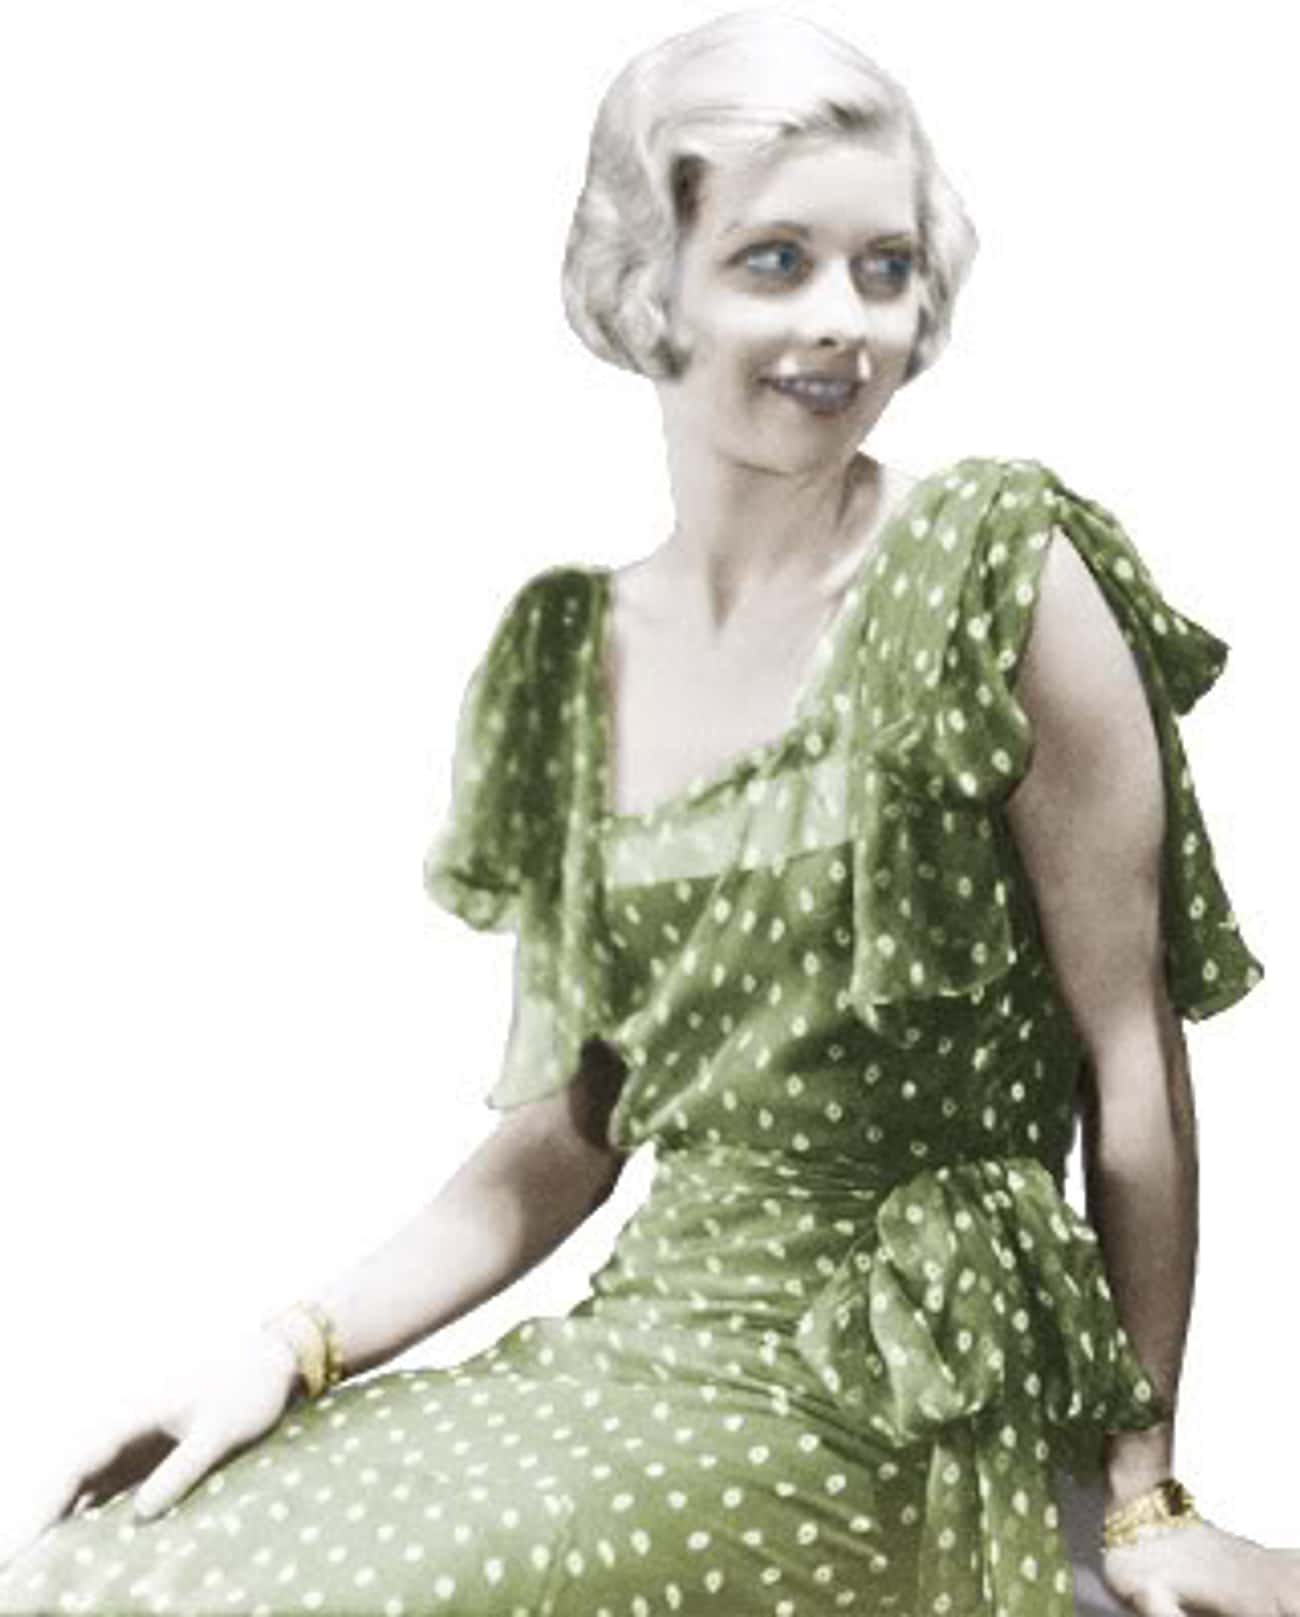 Young Lucille Ball in Green Dress with White Polka Dots